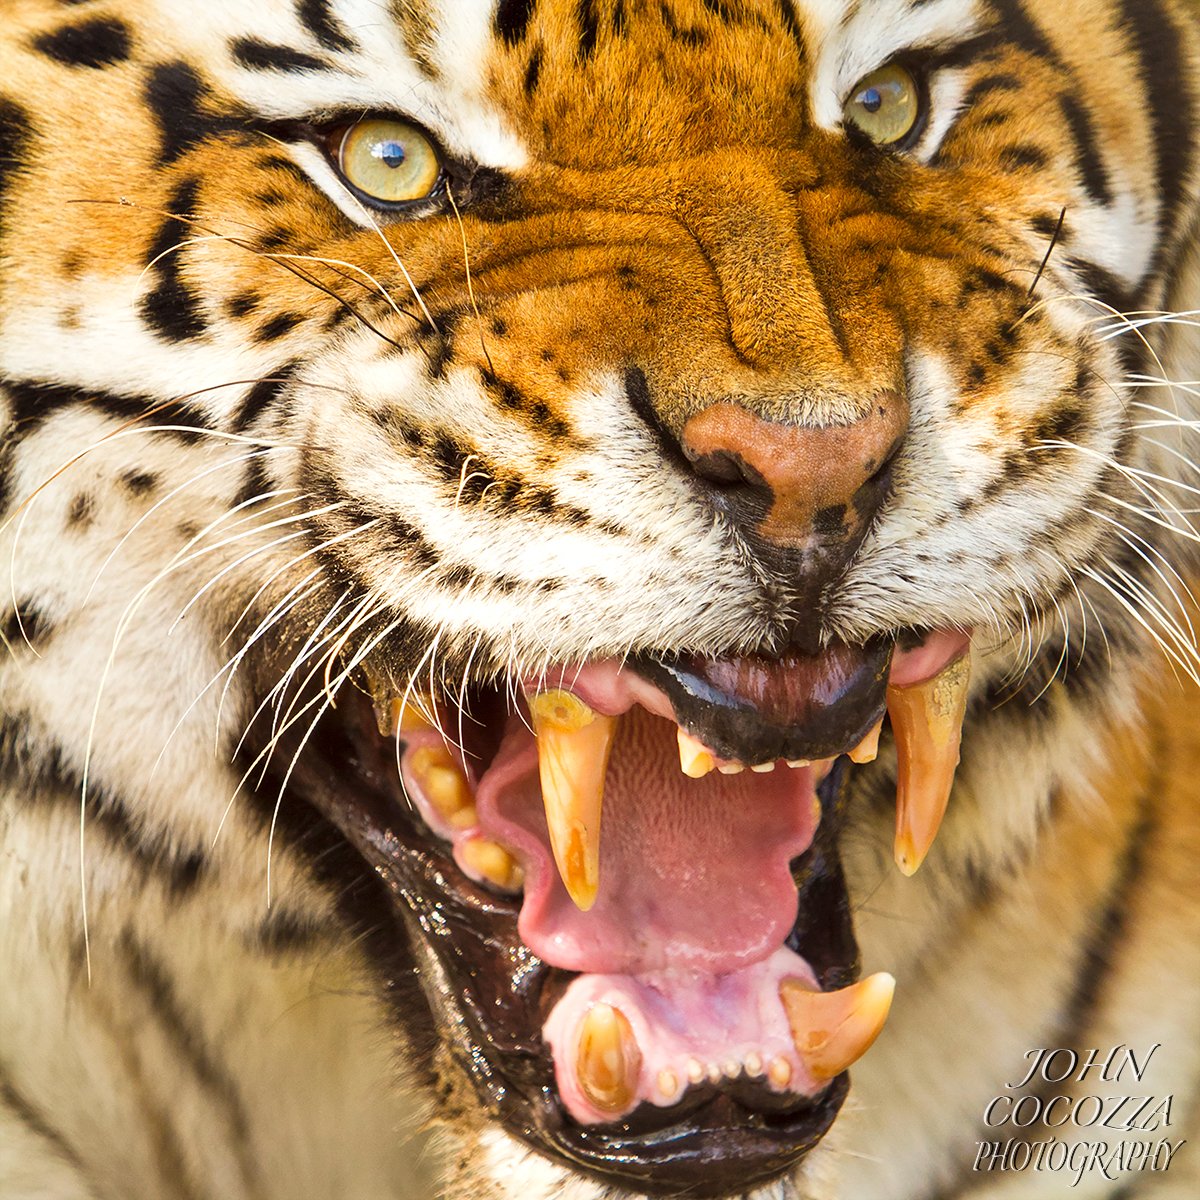 Up close with a fierce big cat.
.
If you would like a print for your home or office then message me via JohnCocozzaPhotography.com
.
#tigers #tigerphotos #wildnature #nature #wildlifephotos #wildlifephotography #cats #catlovers